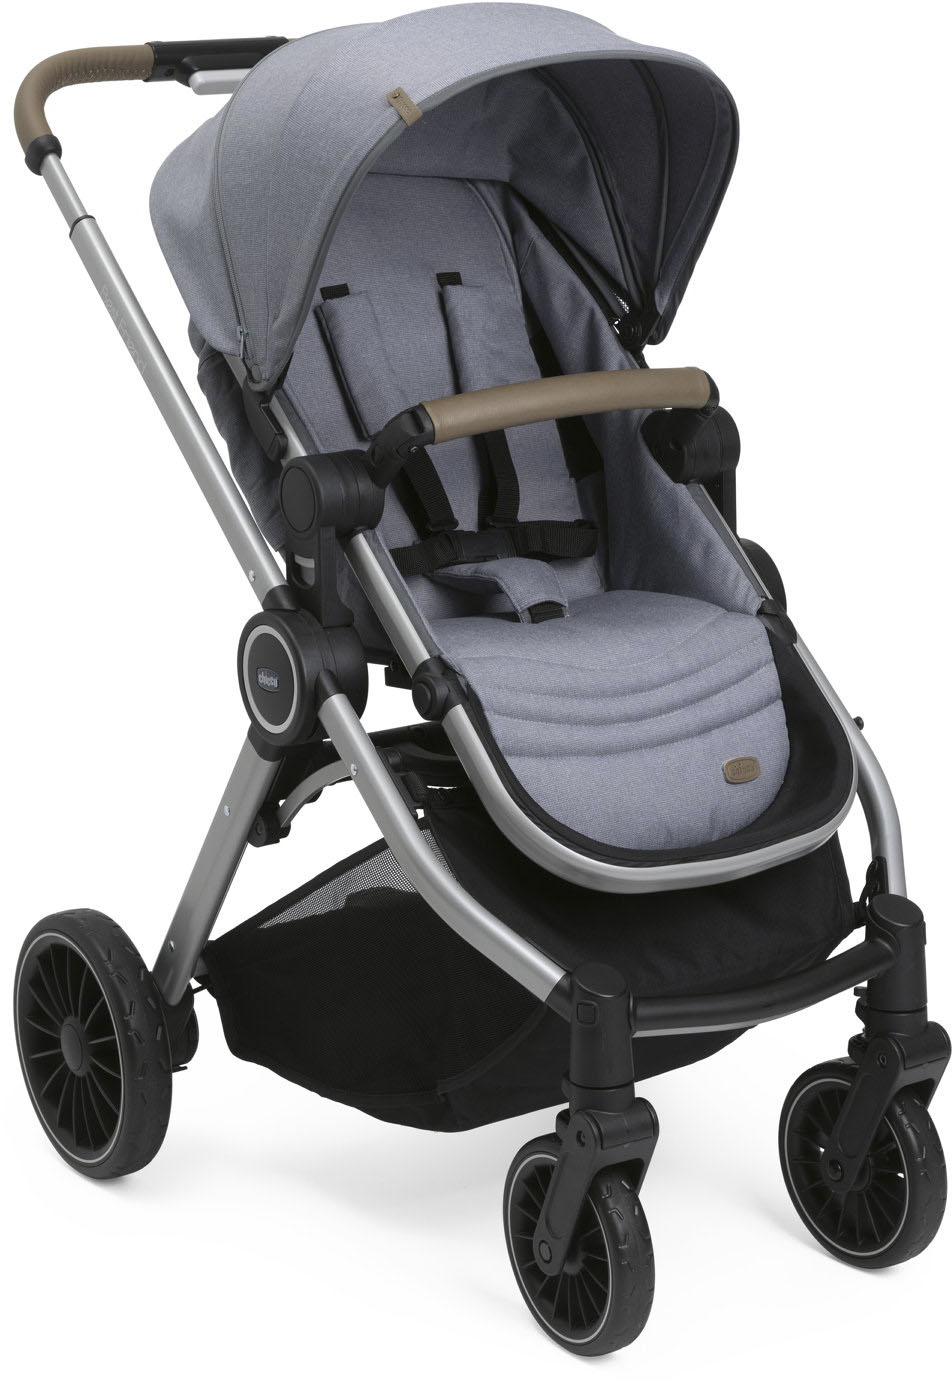 Chicco Sportbuggy »Buggy Best Friend Pro, magnet grey« von Chicco